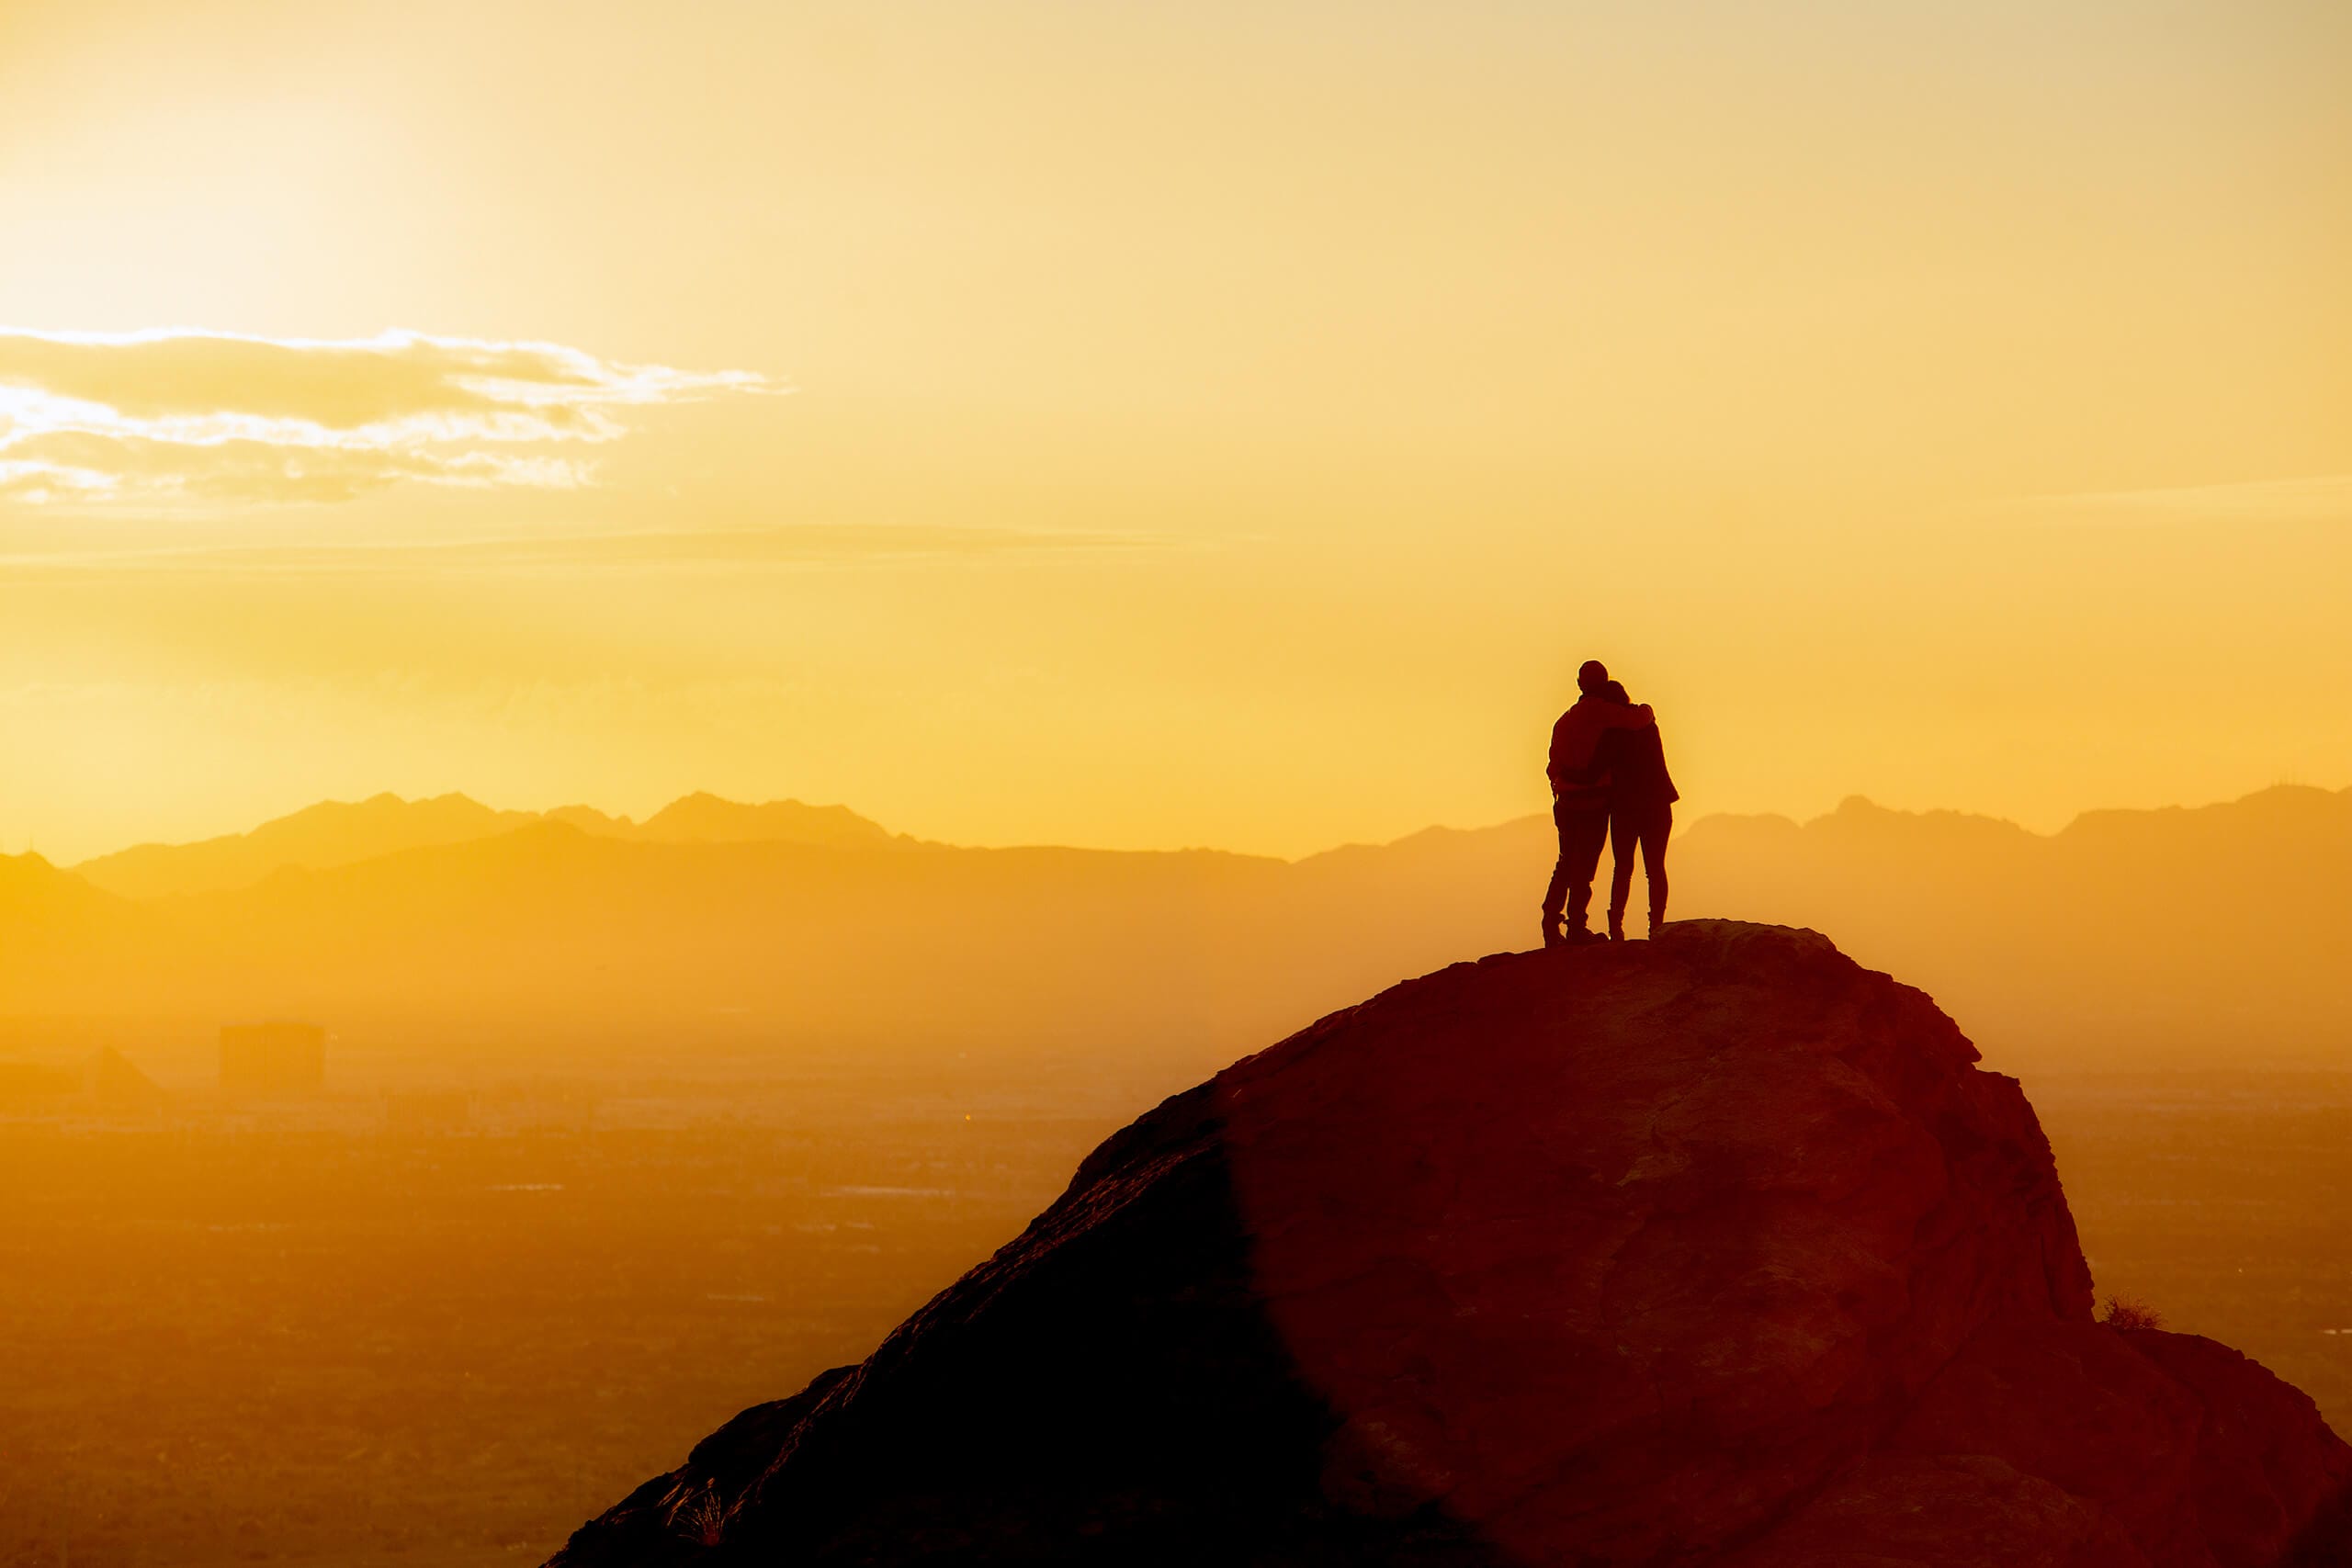 Climbers and hikers enjoy Summerlin for the world-class beauty of scenic Red Rock Canyon National Conservation area. Seen here at sunset.